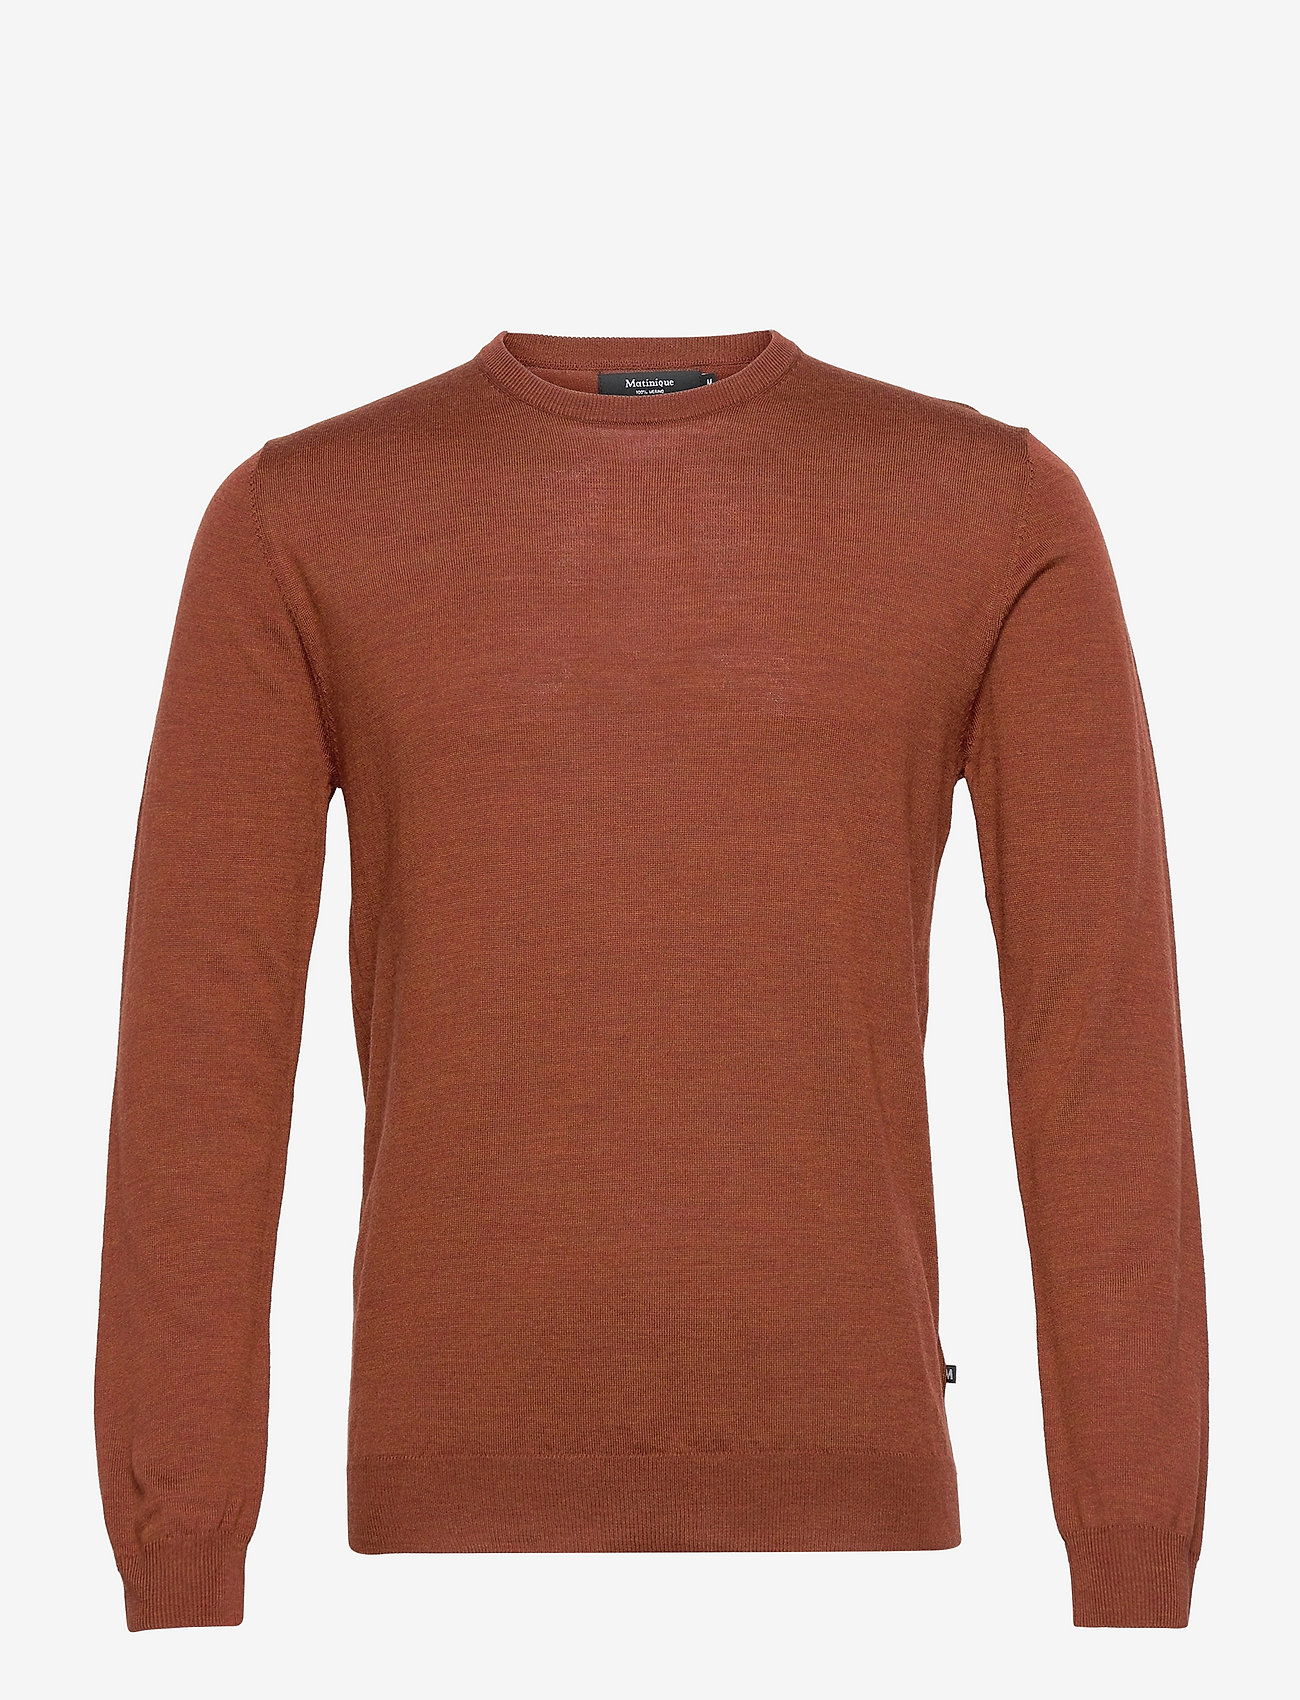 Matinique - Margrate - nordic style - rust brown melange - 1